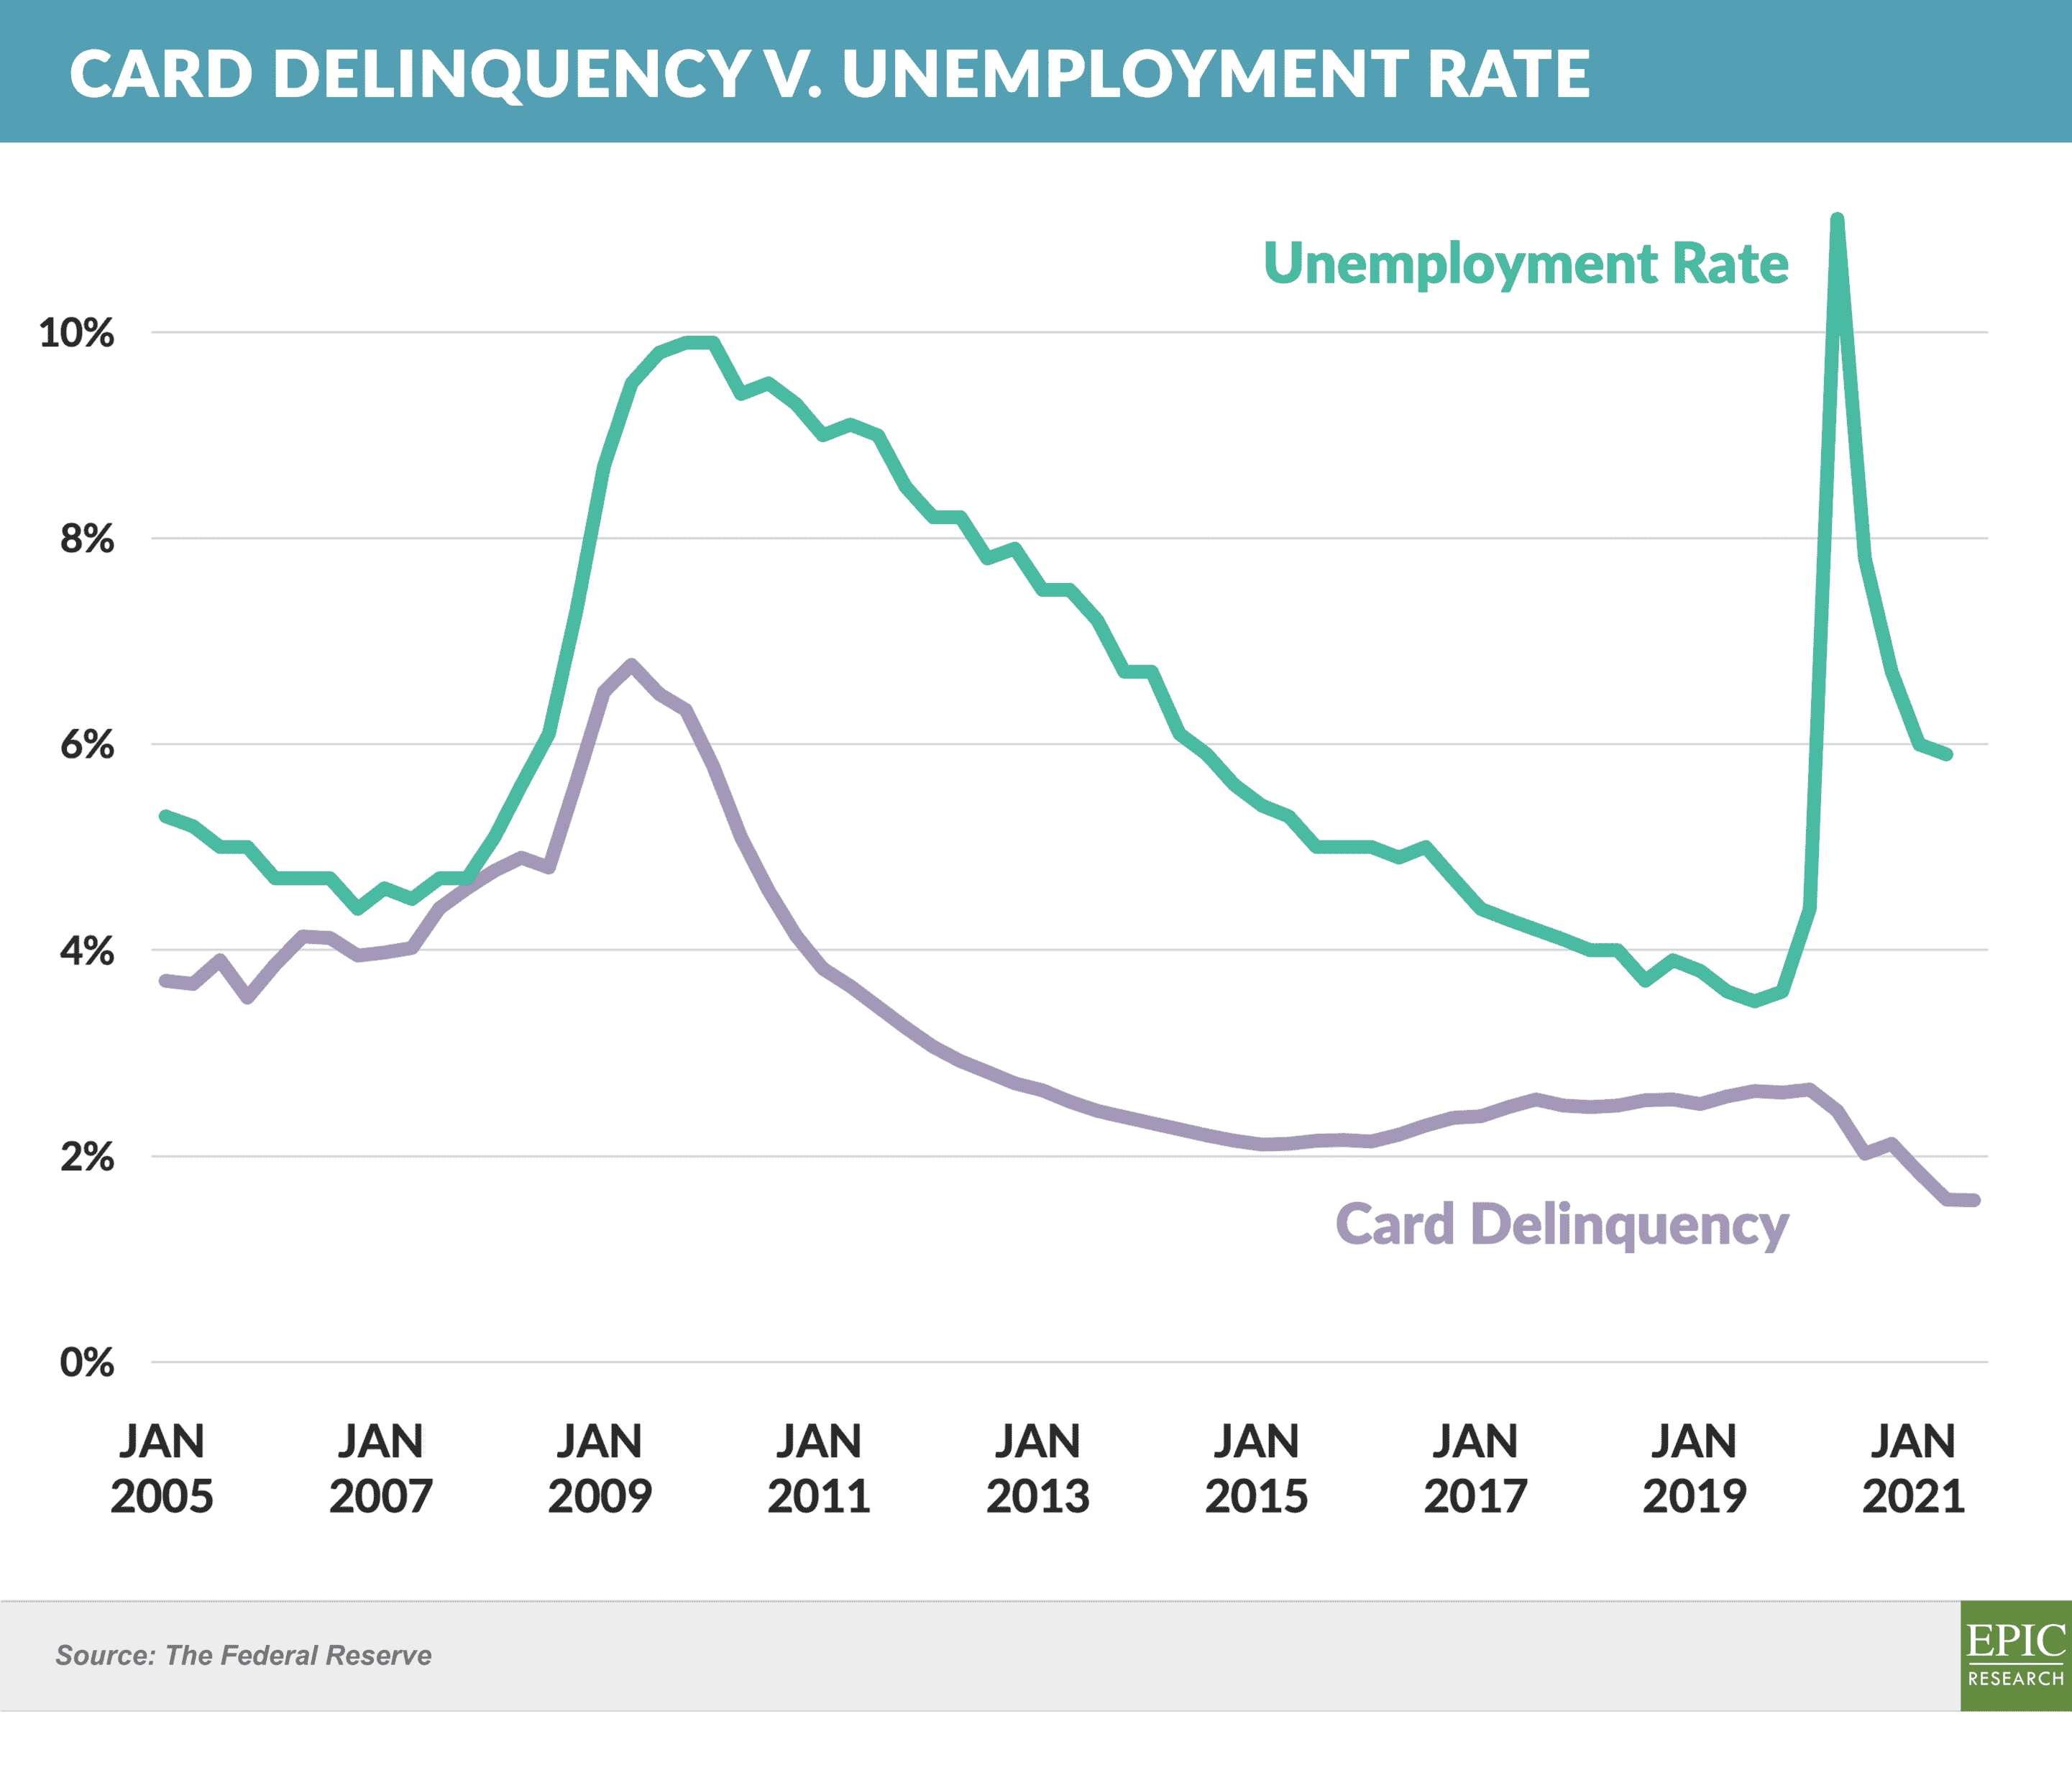 Card Delinquency v. Unemployment Rate